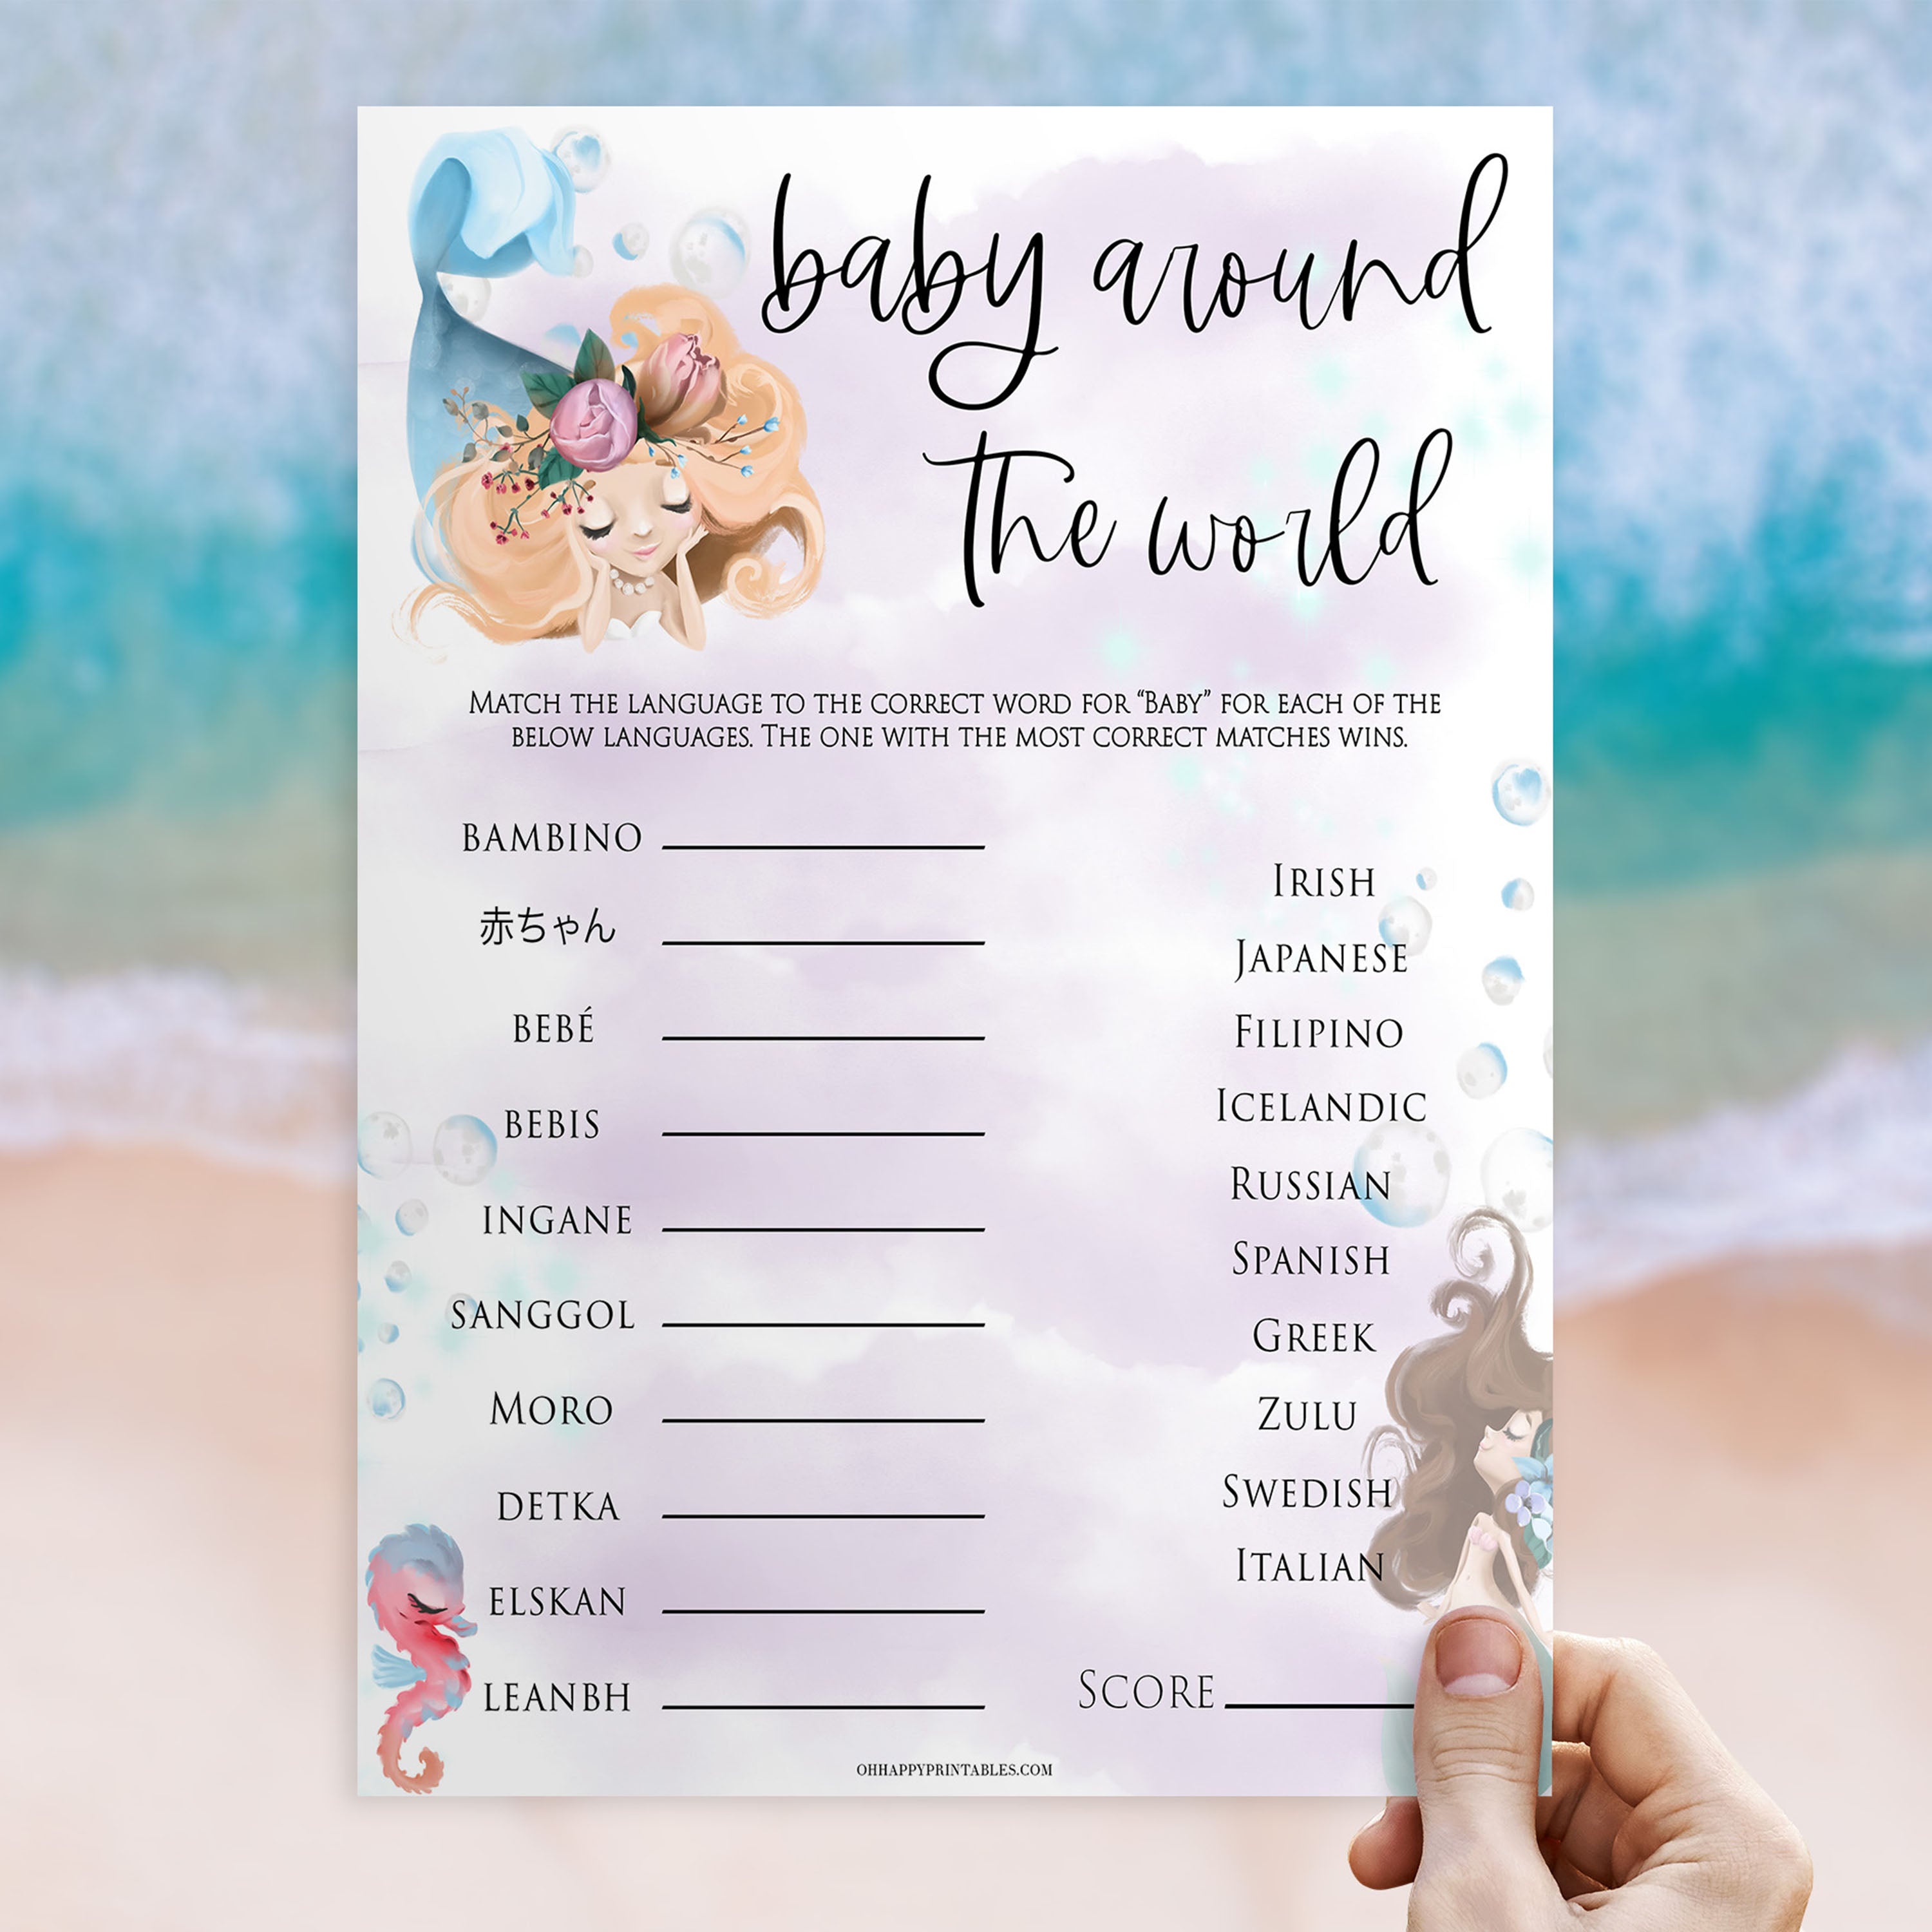 Baby around the word game, Printable baby shower games, little mermaid baby games, baby shower games, fun baby shower ideas, top baby shower ideas, little mermaid baby shower, baby shower games, pink hearts baby shower ideas